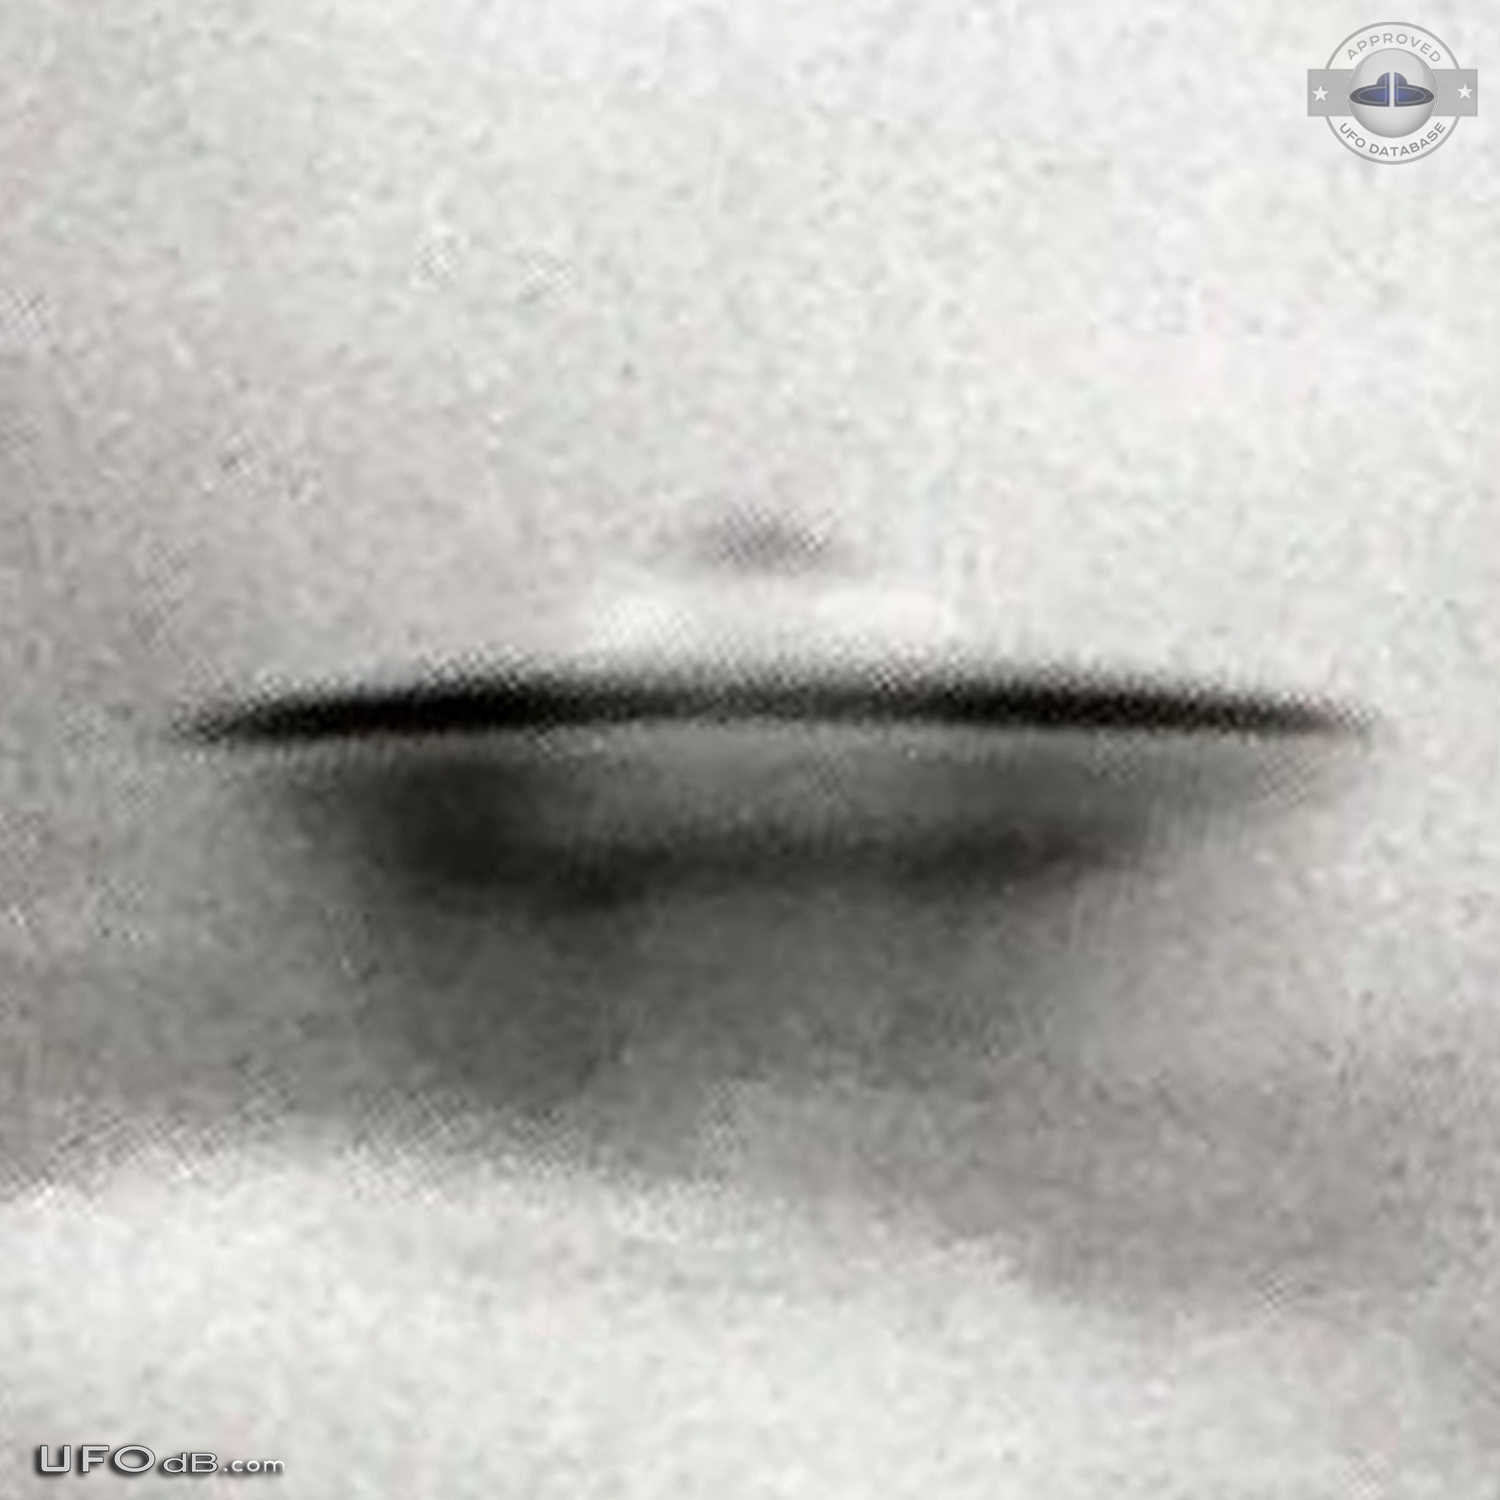 Old Grey 1968 UFO picture from Clifden Ireland showing a double saucer UFO Picture #465-4